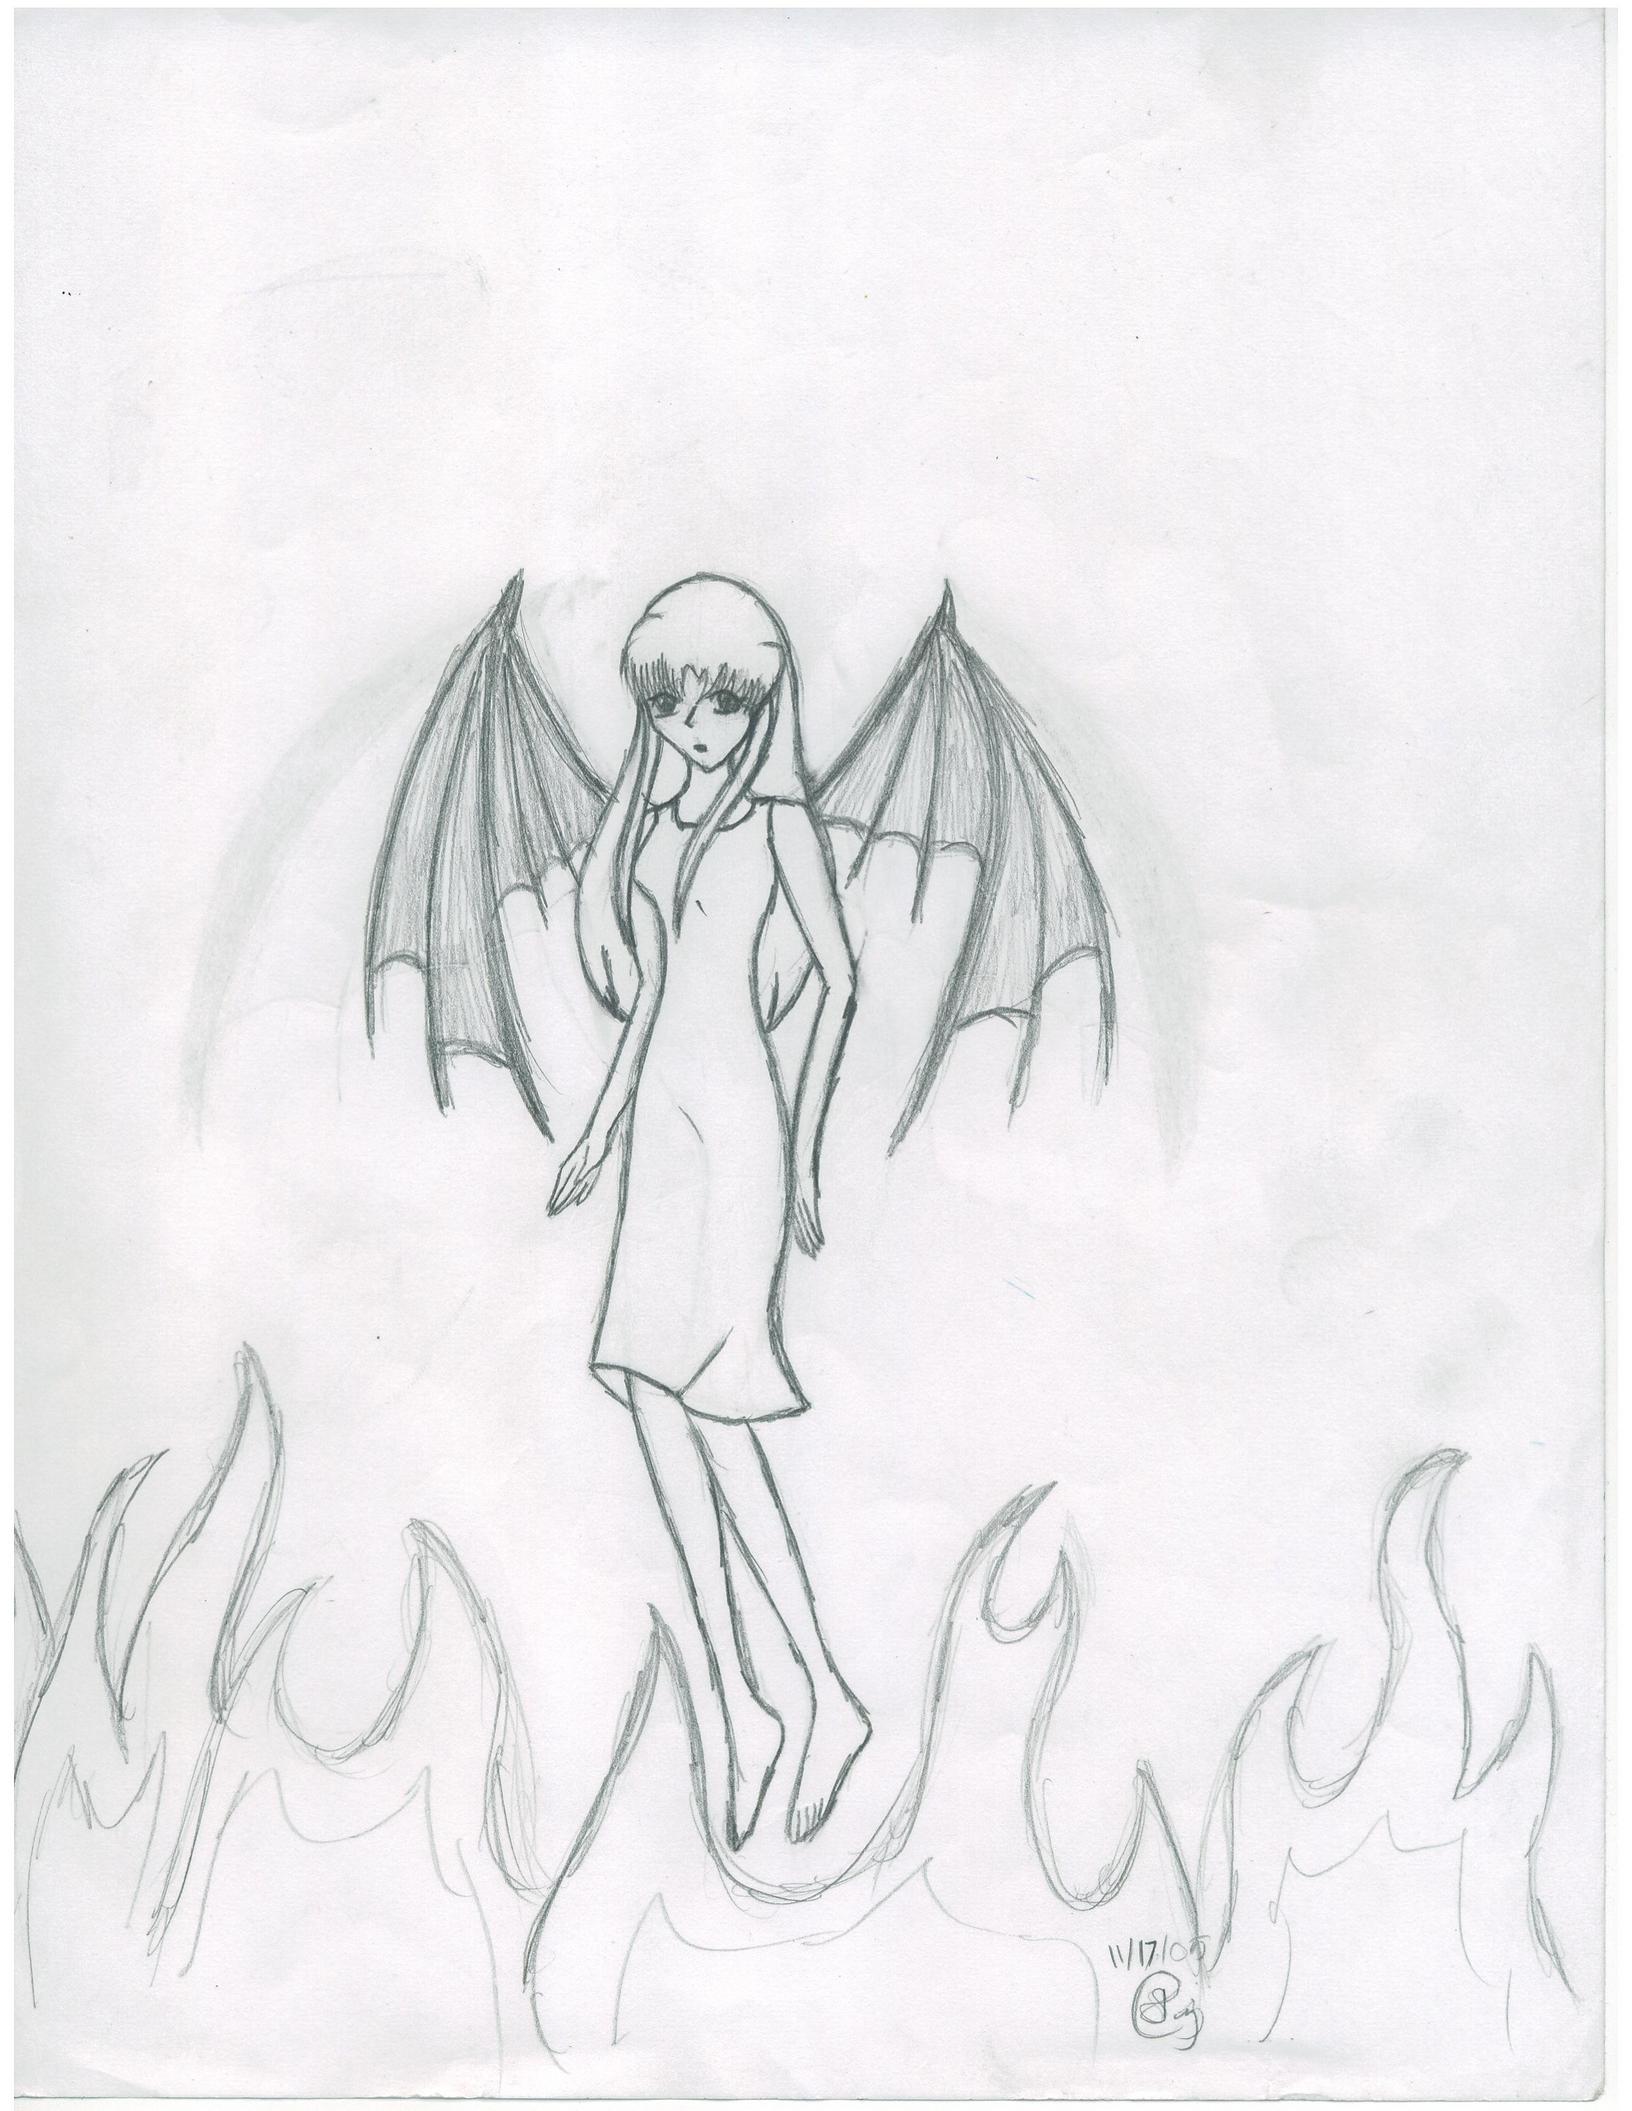 Girl with bat wings over fire by LiL_NeKo_DeMoN